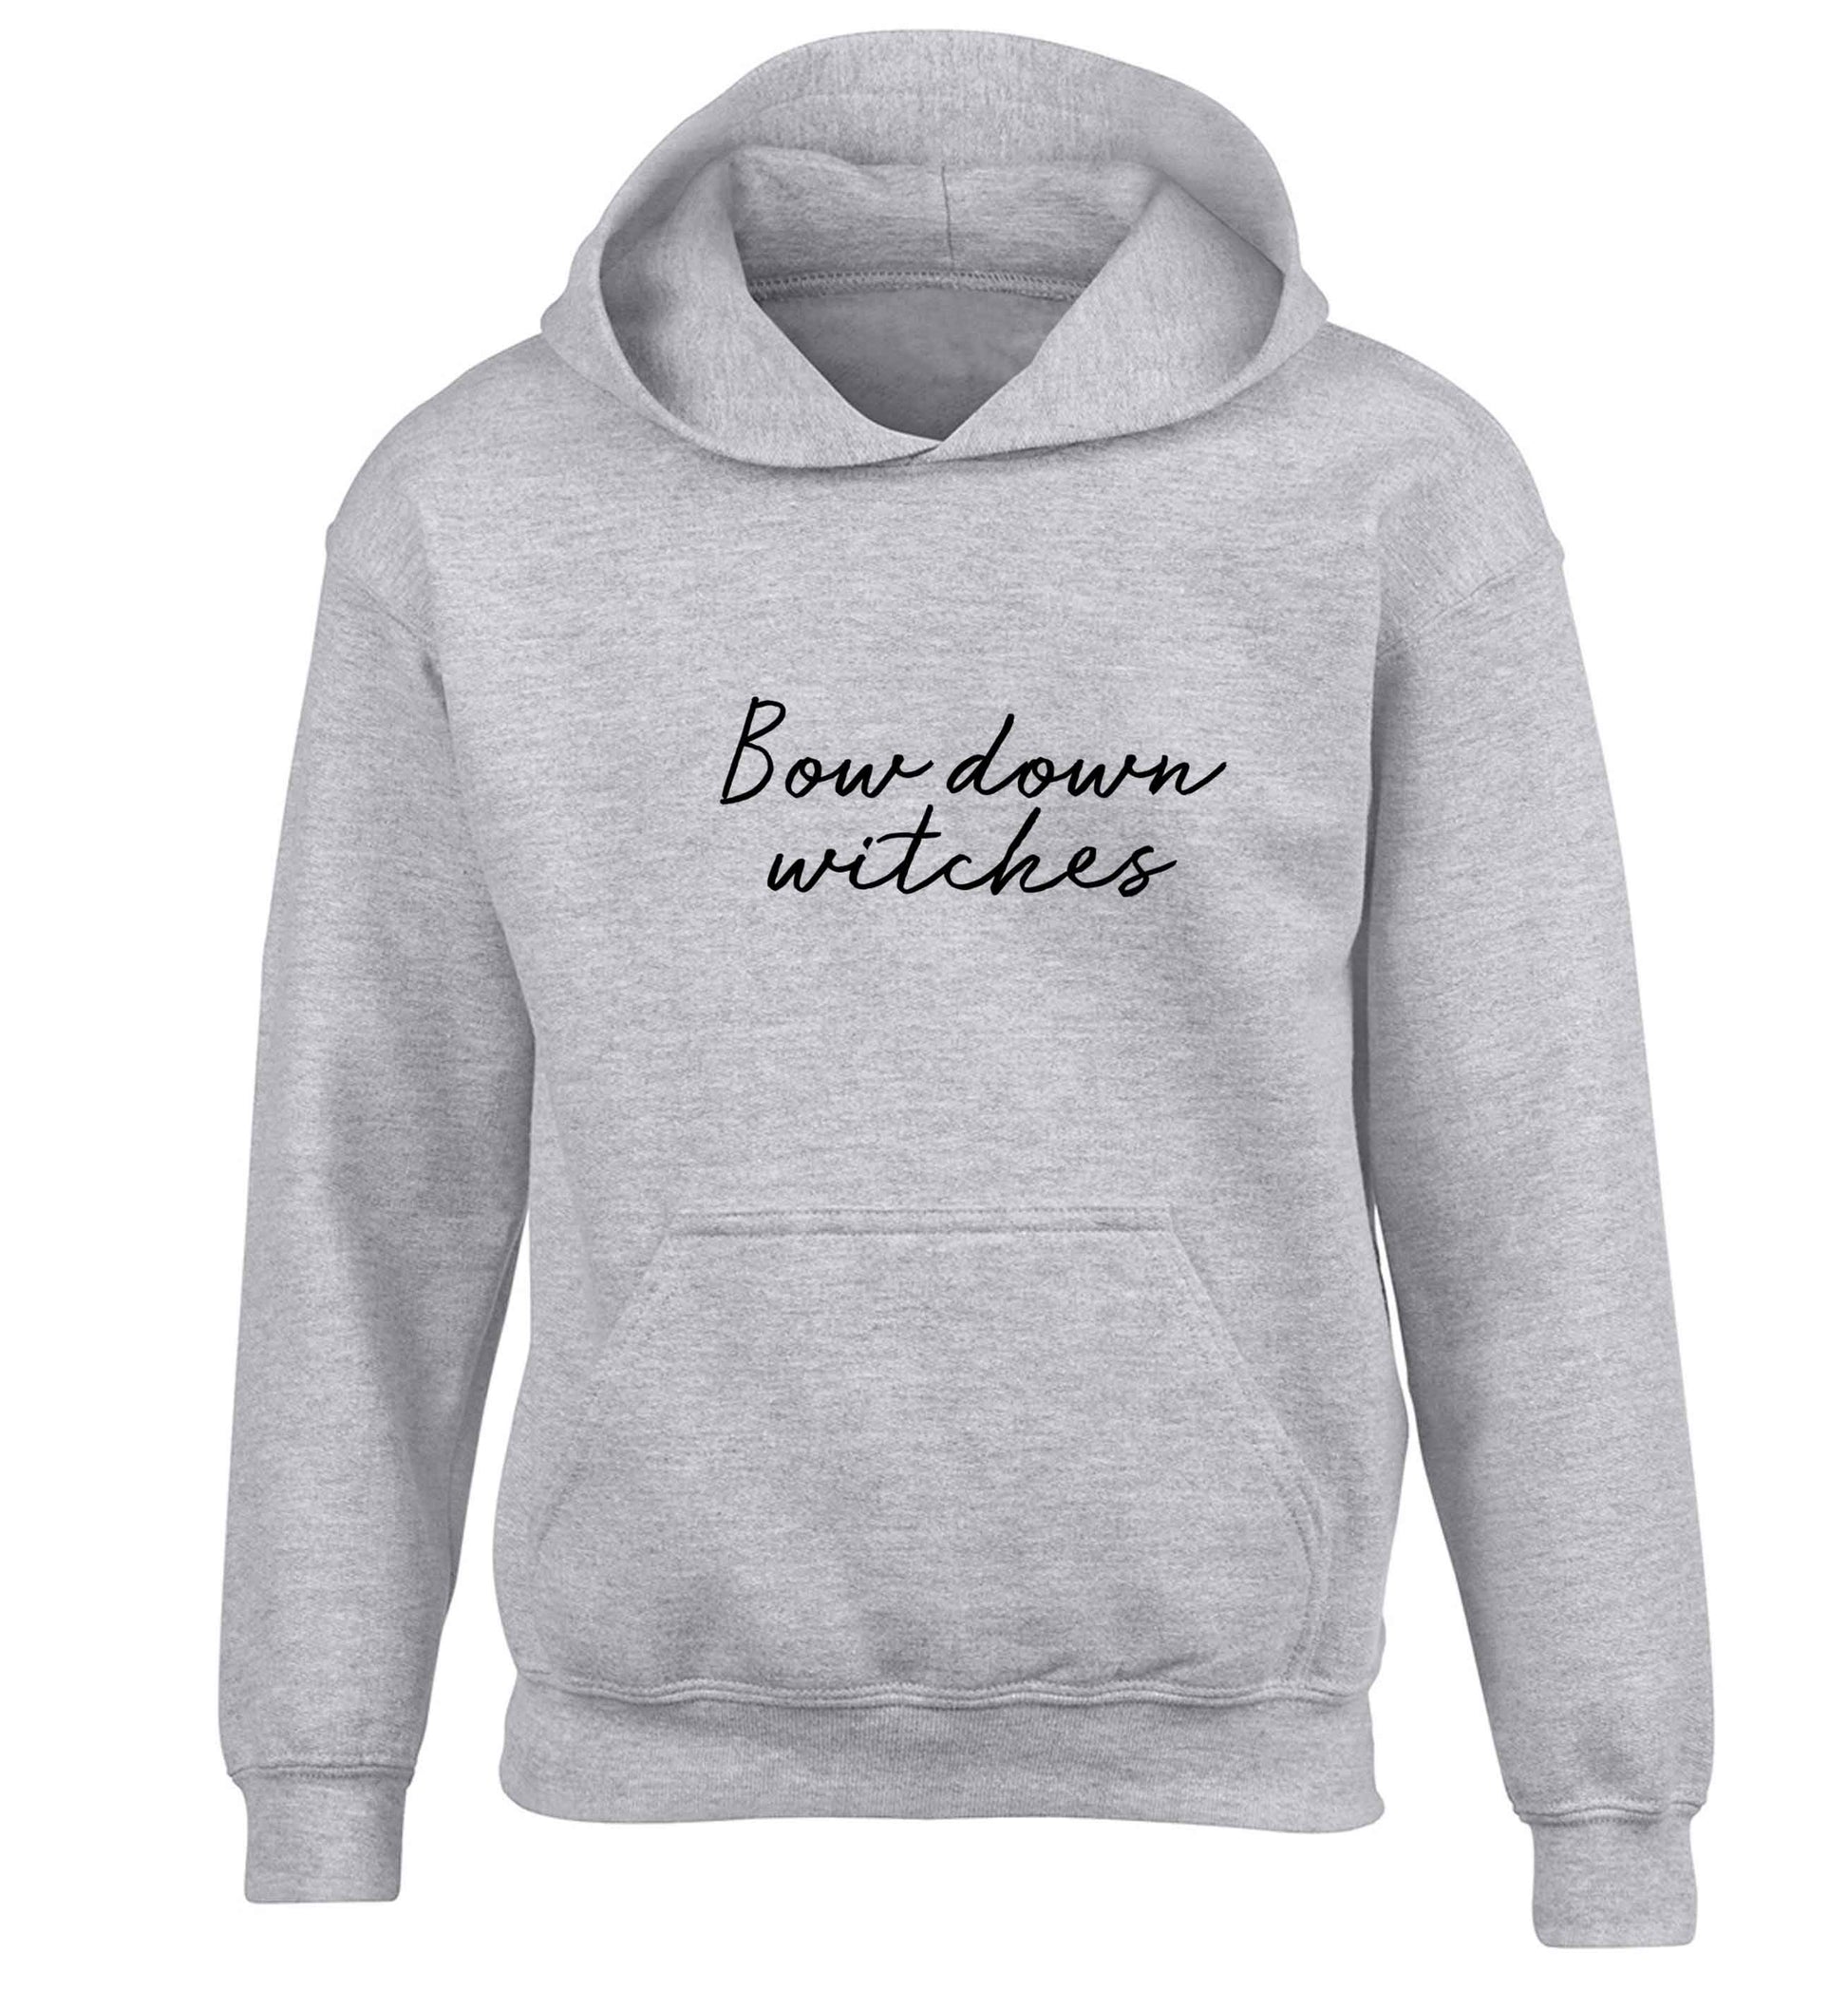 Bow down witches children's grey hoodie 12-13 Years